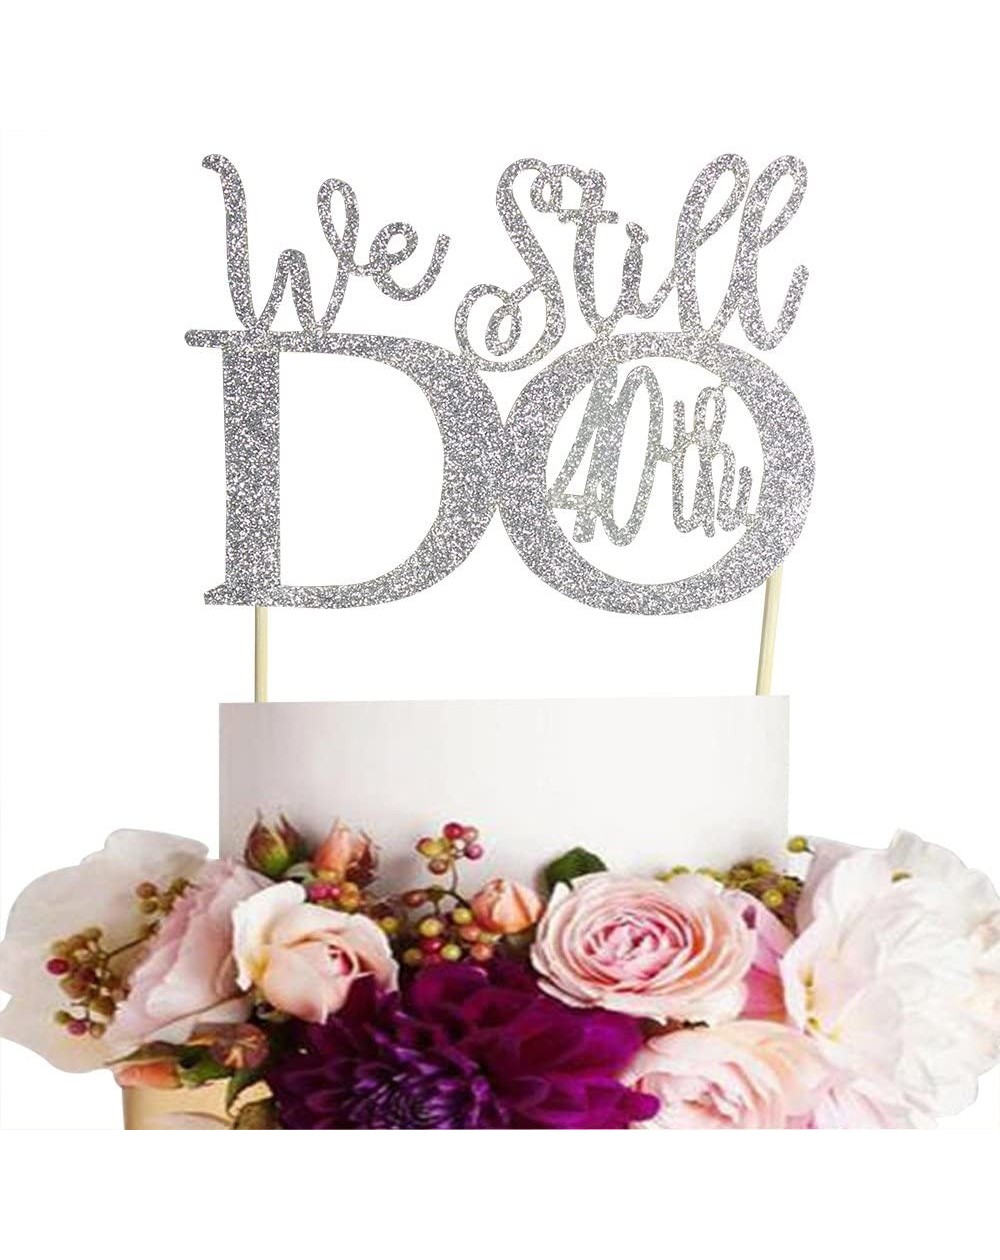 Cake & Cupcake Toppers Glitter Silver 40th Anniversary Cake Topper We Still Do 40th Vow Renewal Wedding Anniversary Cake Topp...